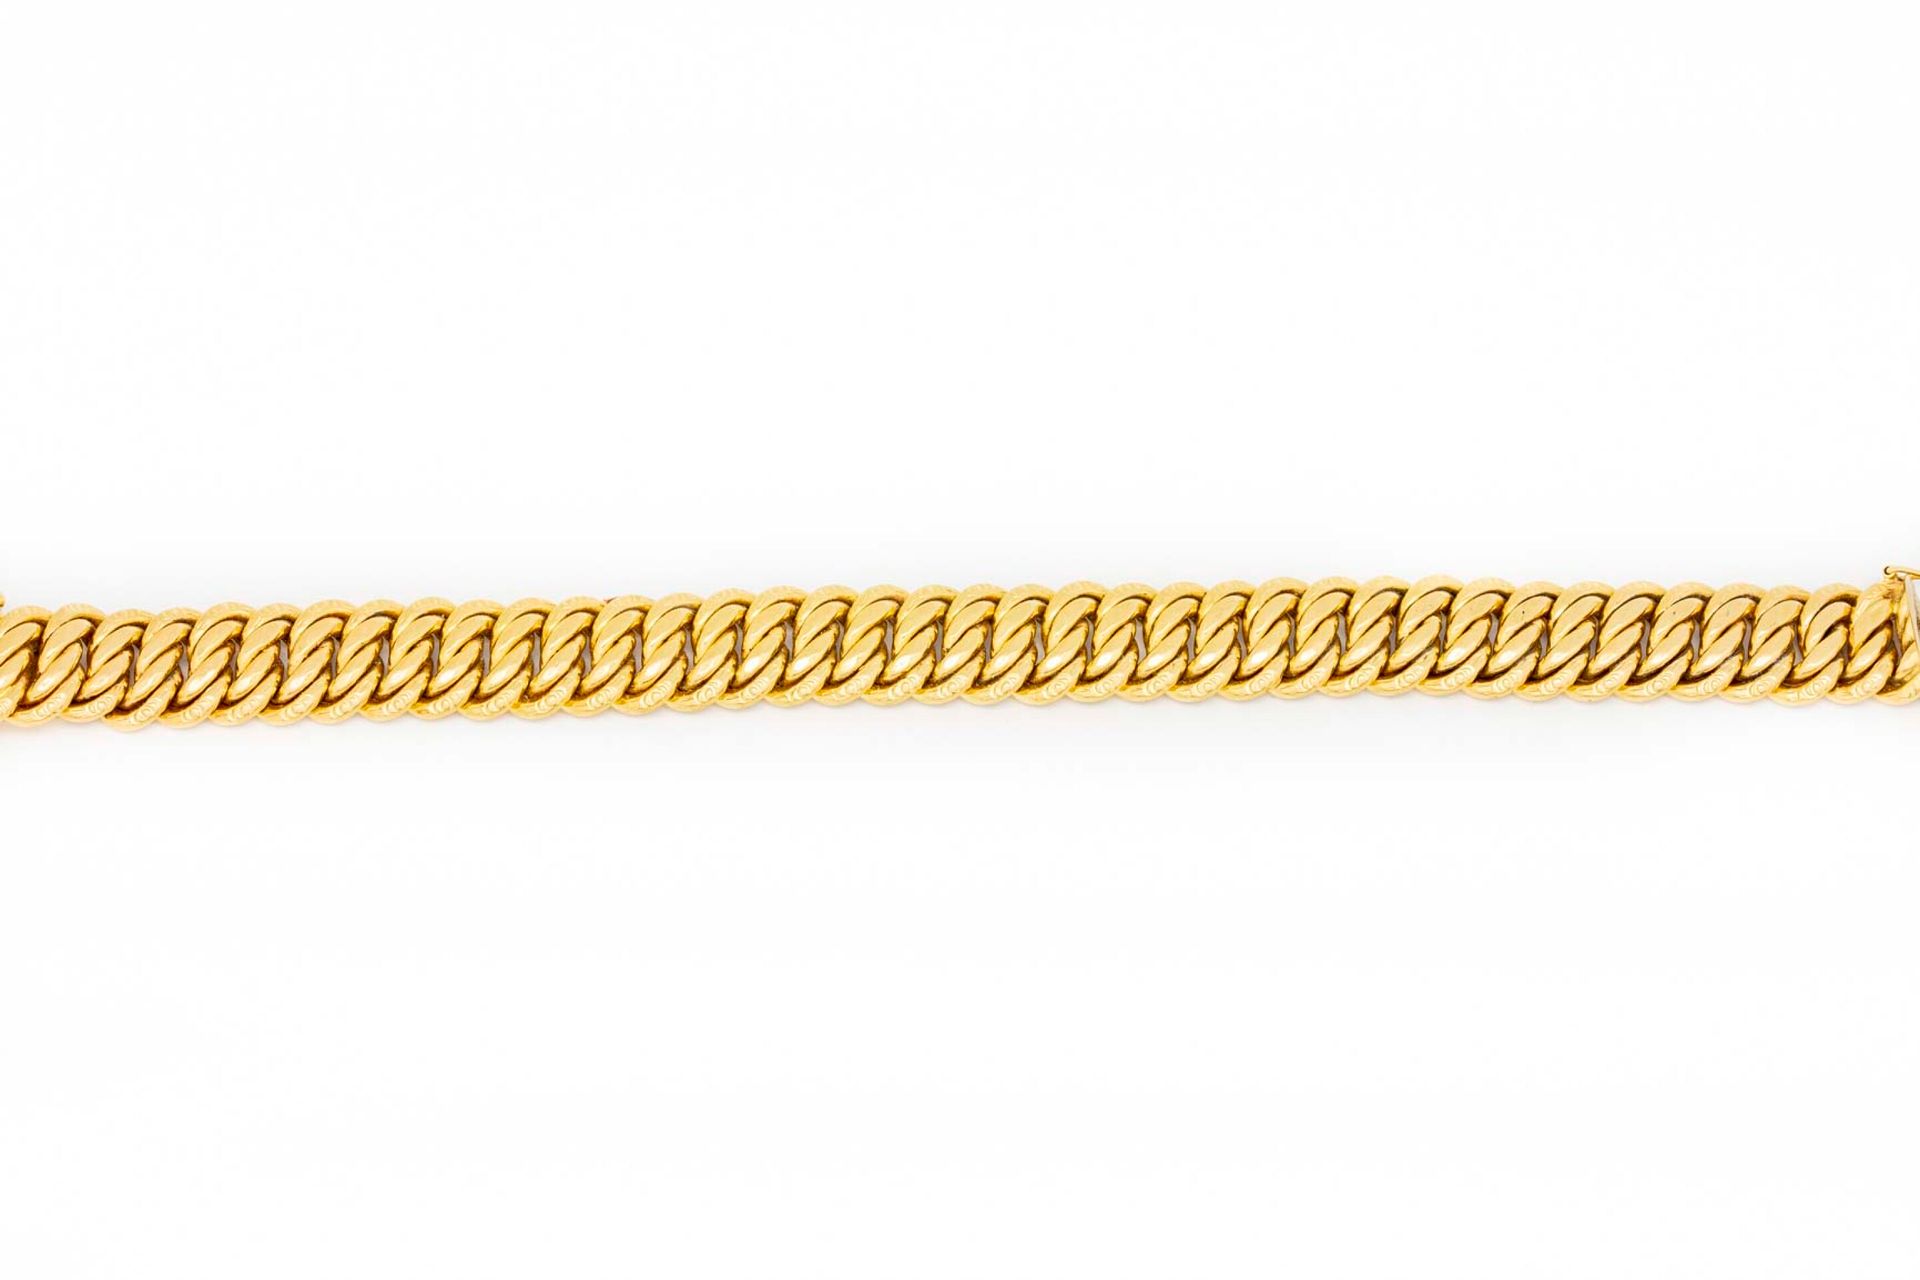 Null Yellow gold bracelet with flexible articulated links

Weight : 26,4 g.